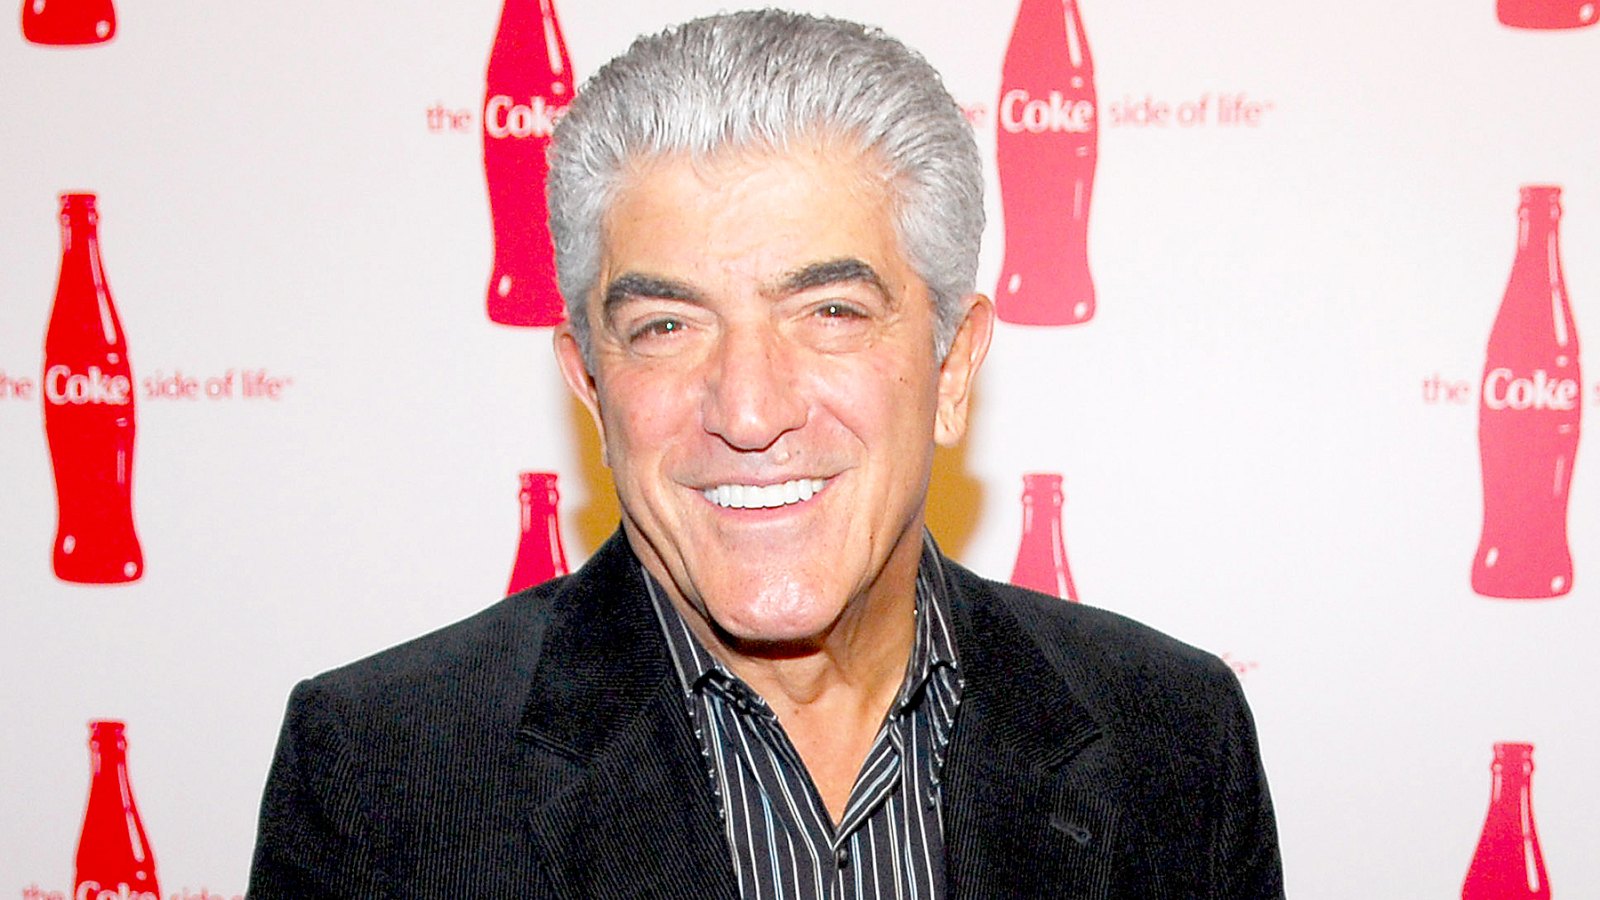 Frank Vincent during Coca-Cola's "Coke Side Of Life" Launch Party with a Performance by Ne-Yo - March 30, 2006 at Capitale in New York City, New York, United States.